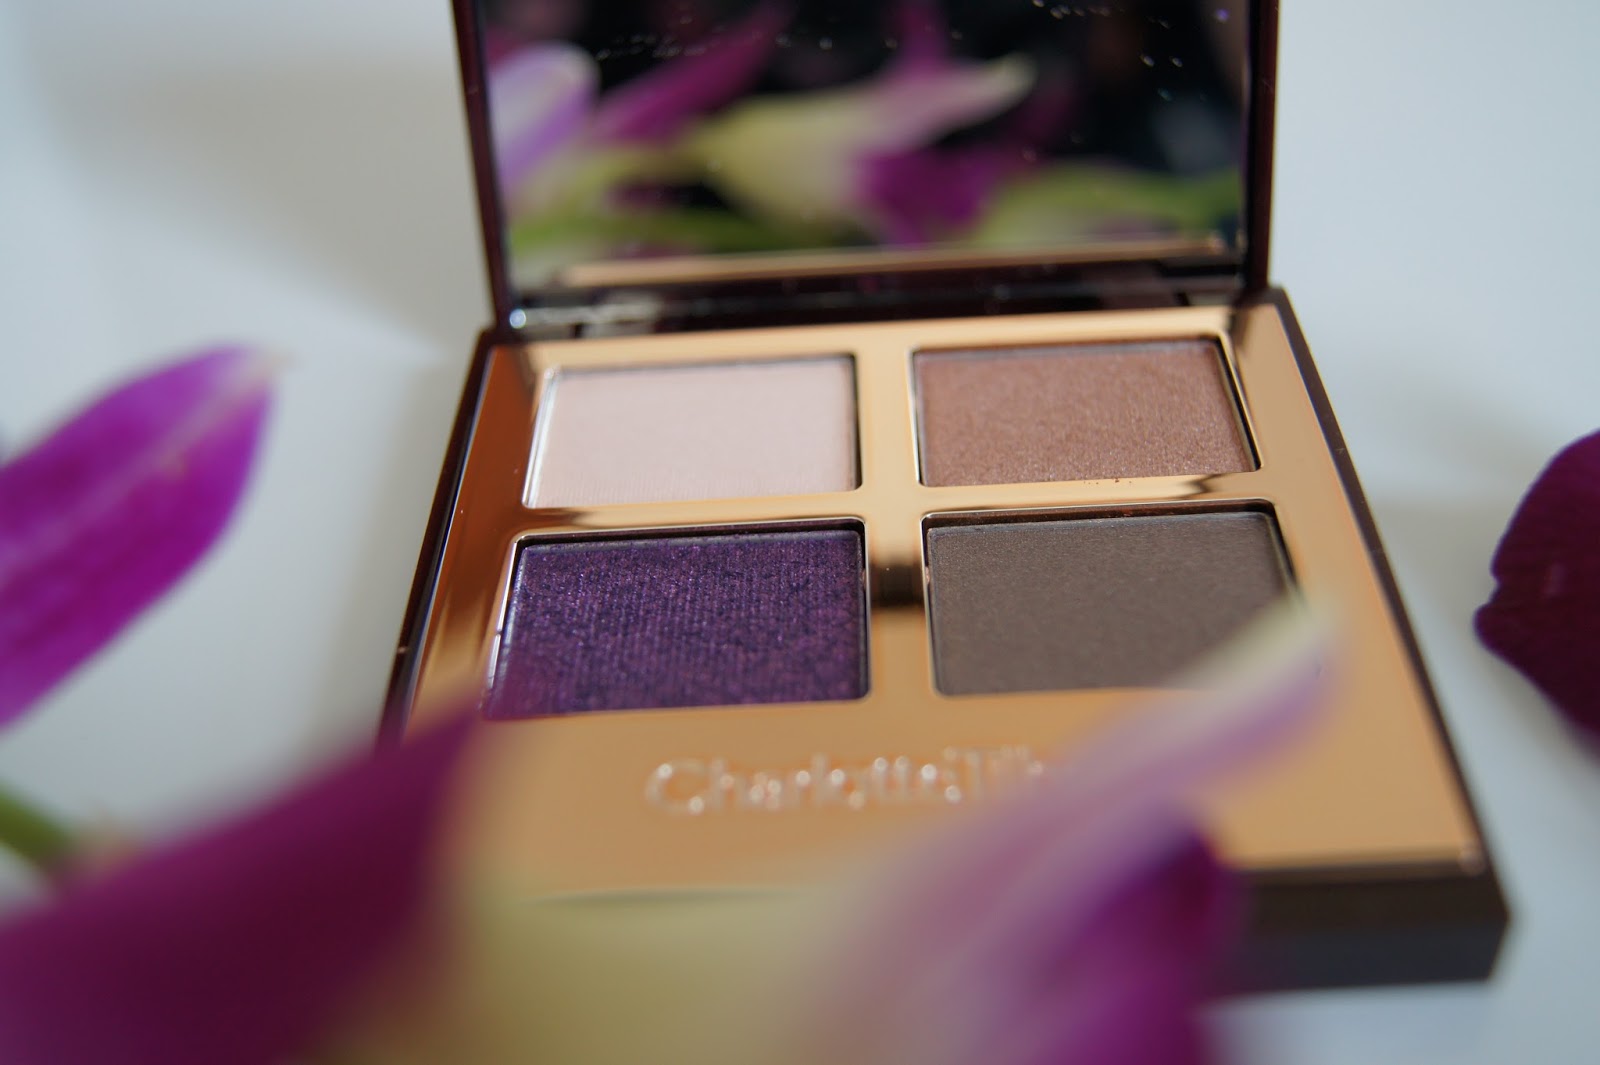 Charlotte Tilbury Luxury Eye Palette in The Glamour Muse review